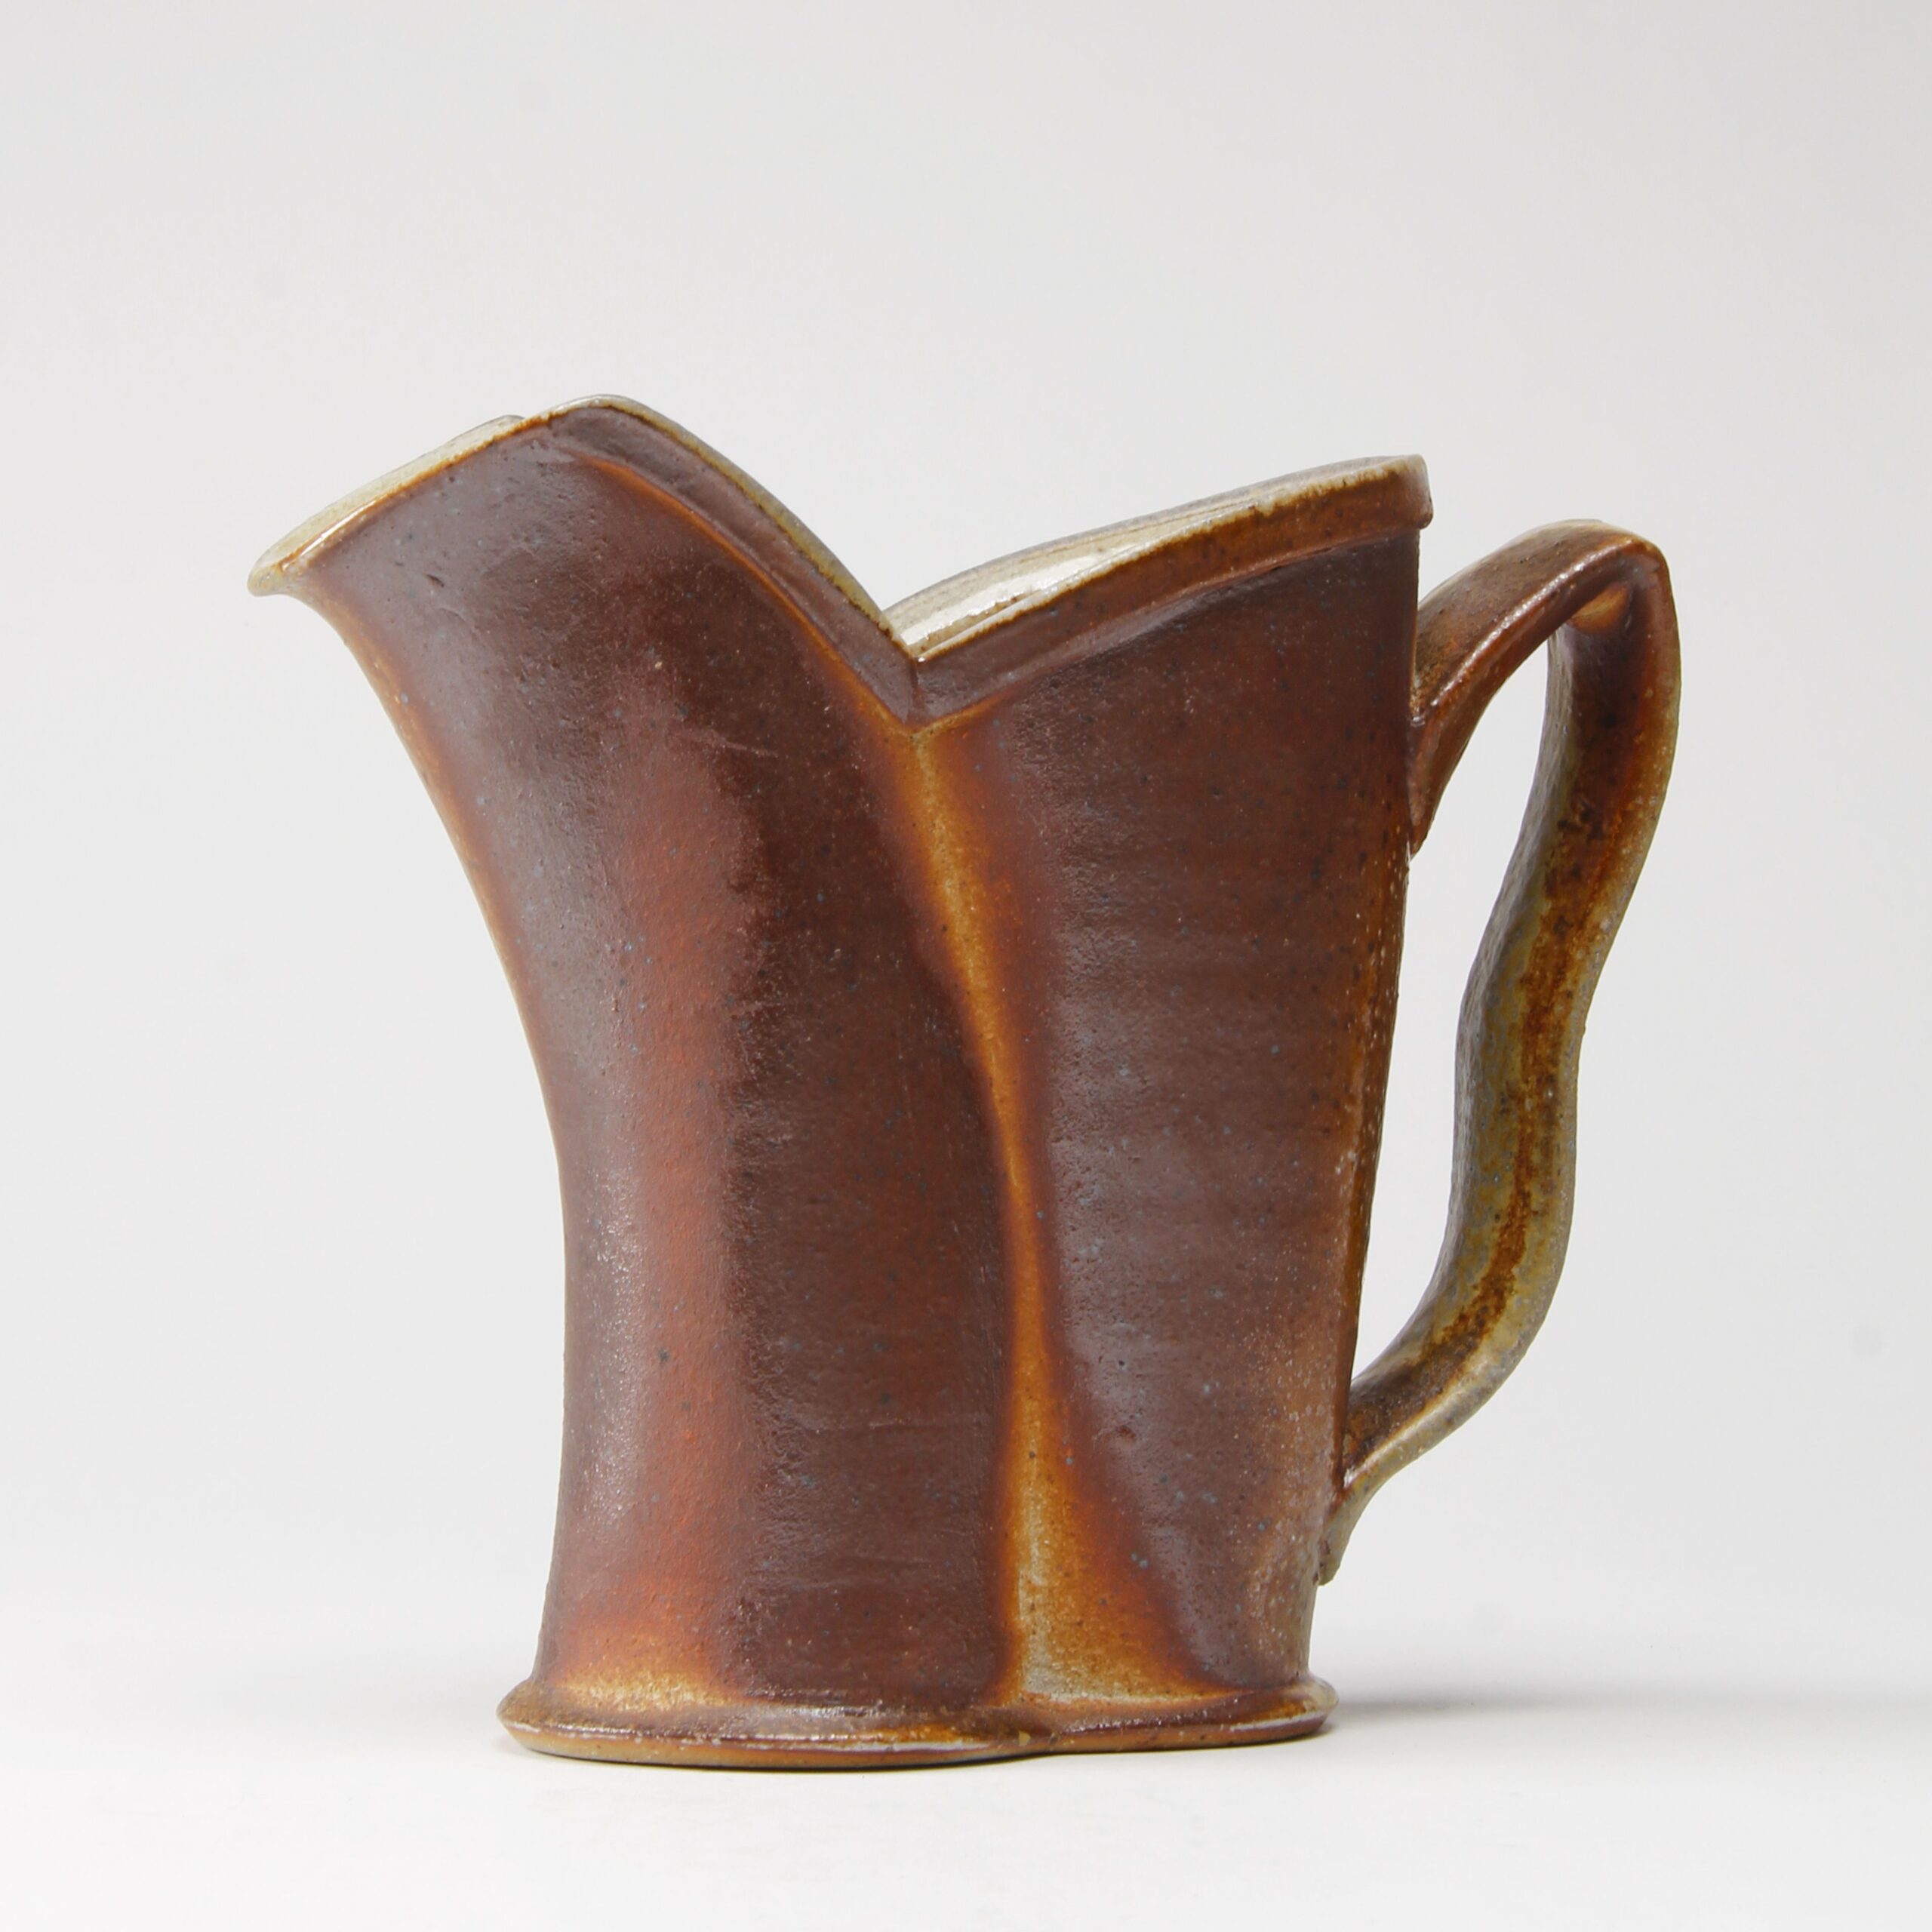 Bruce Cochrane: Rust Pitcher Product Image 1 of 5